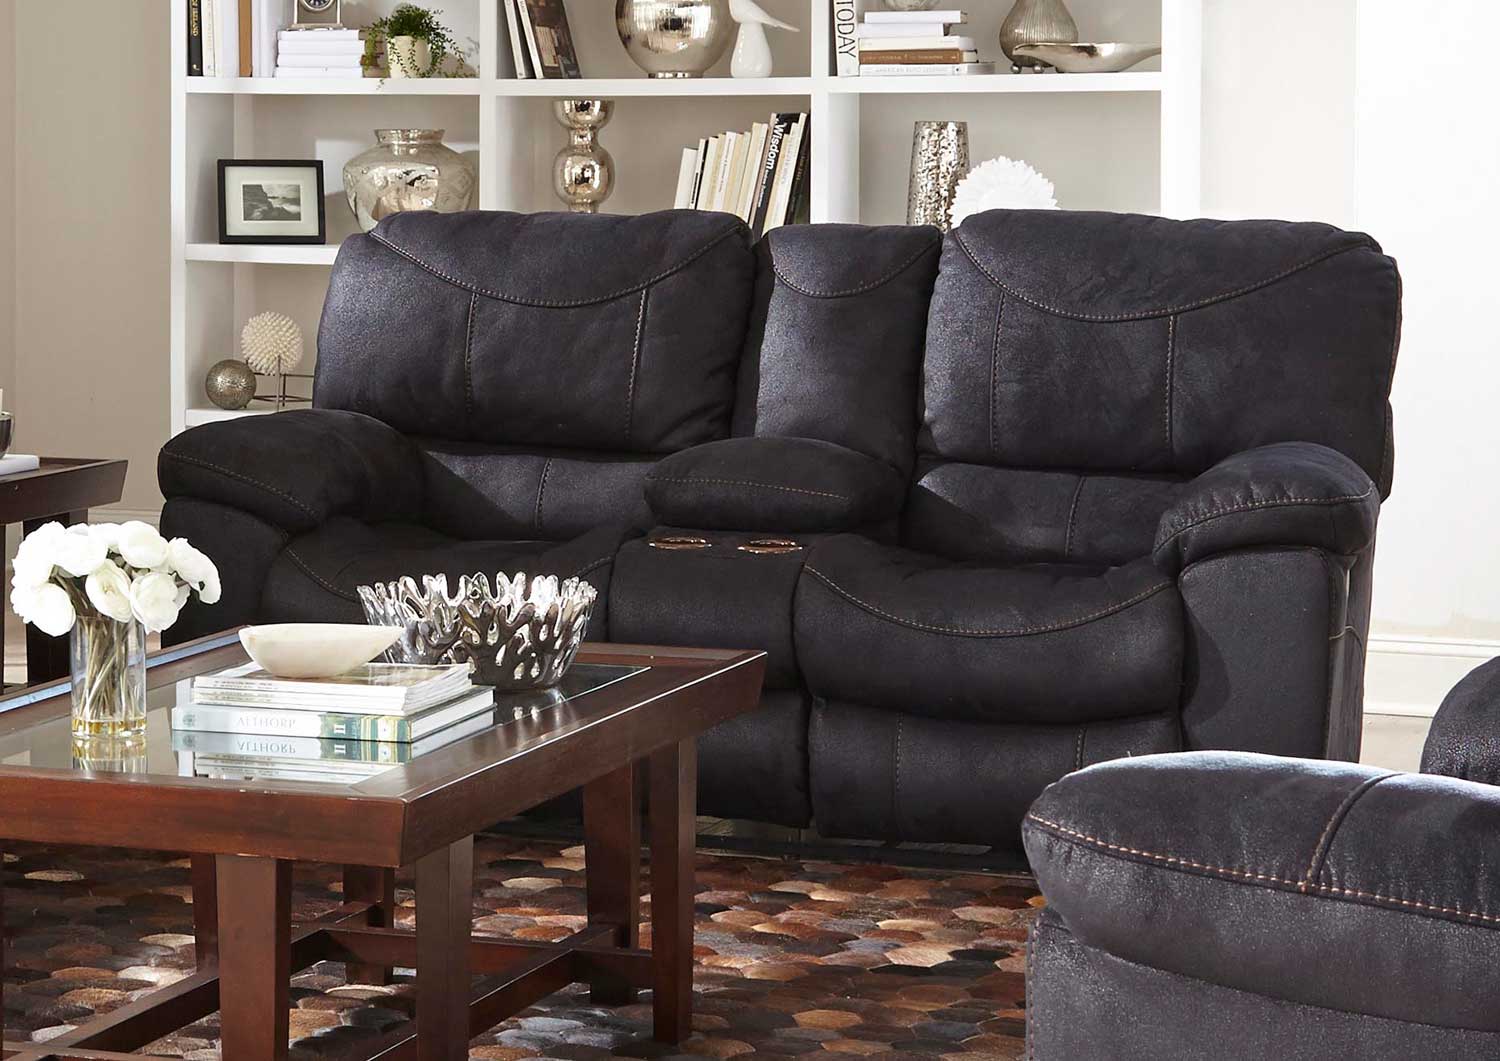 CatNapper Terrance Reclining Console Loveseat with Storage - Cupholders - Black